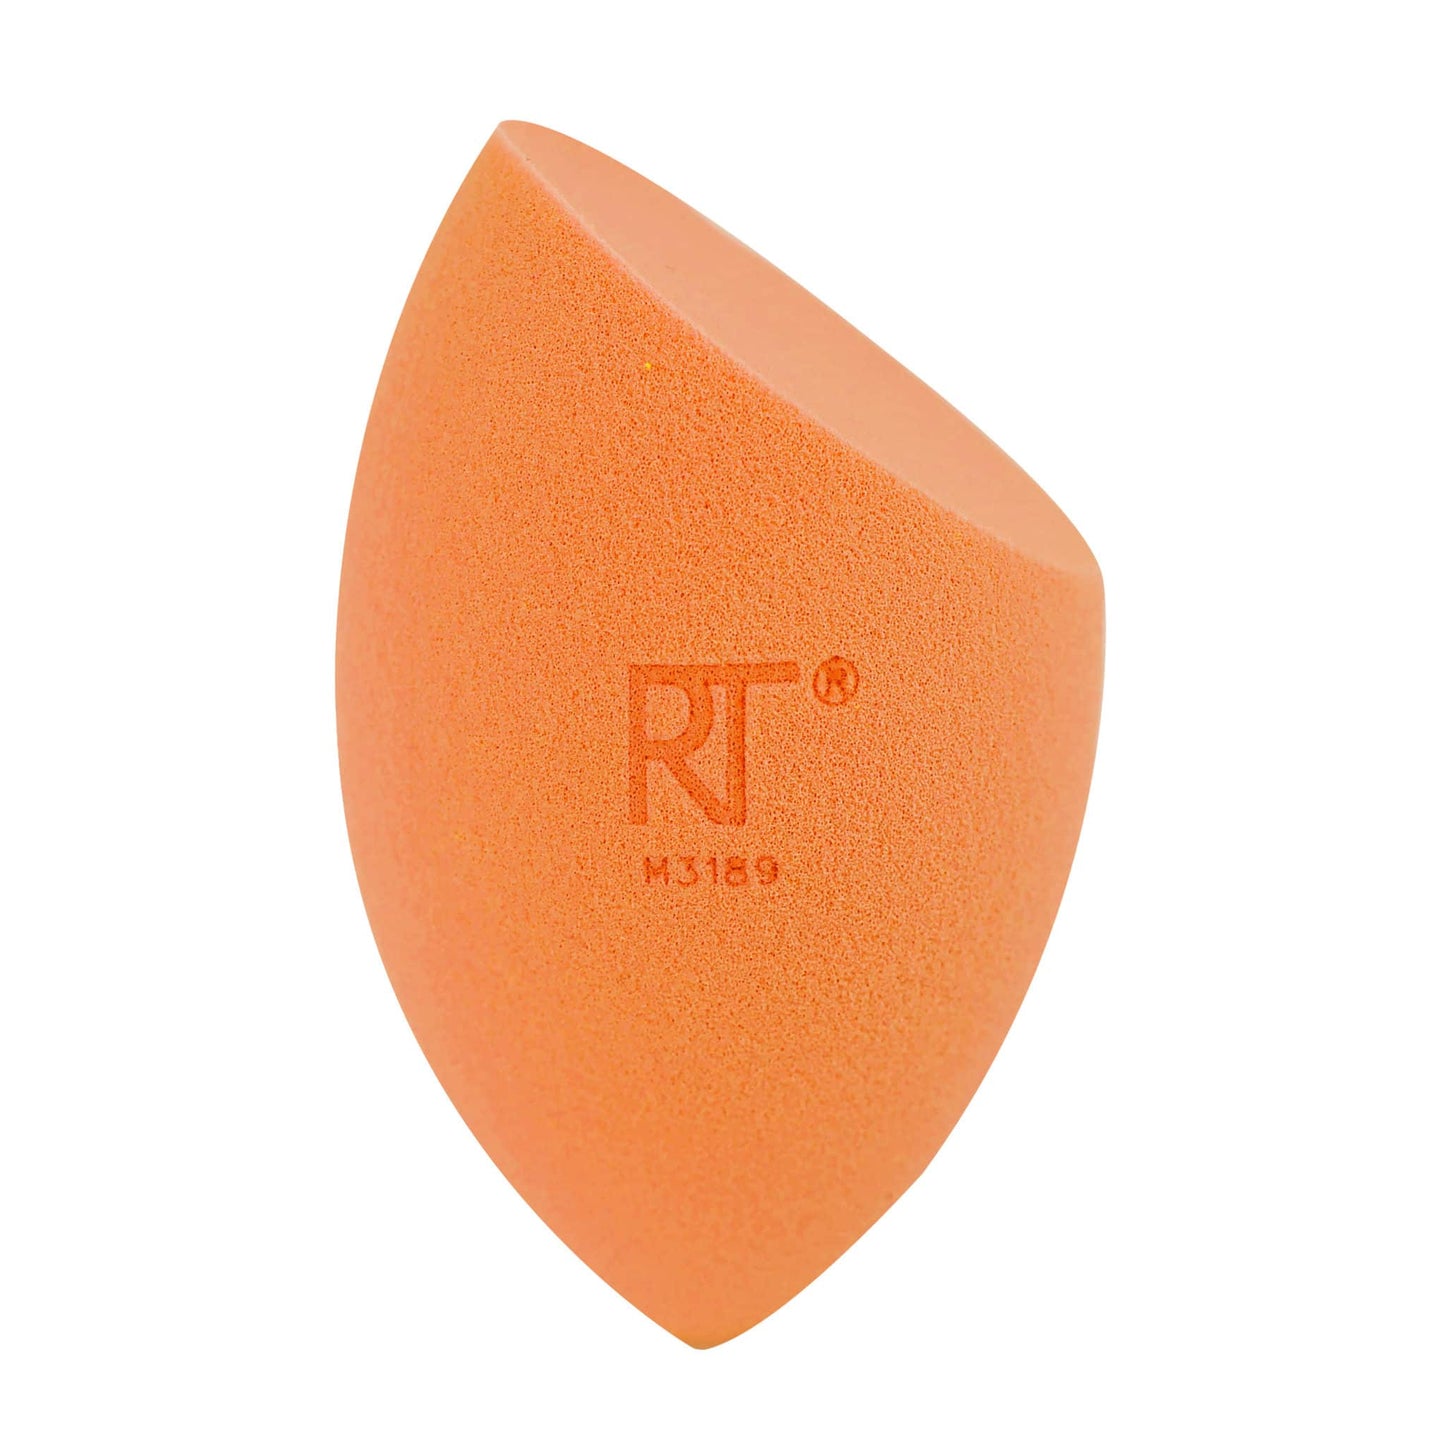 Real Techniques 1566 Limited Edition Animalista Miracle Complexion Sponge